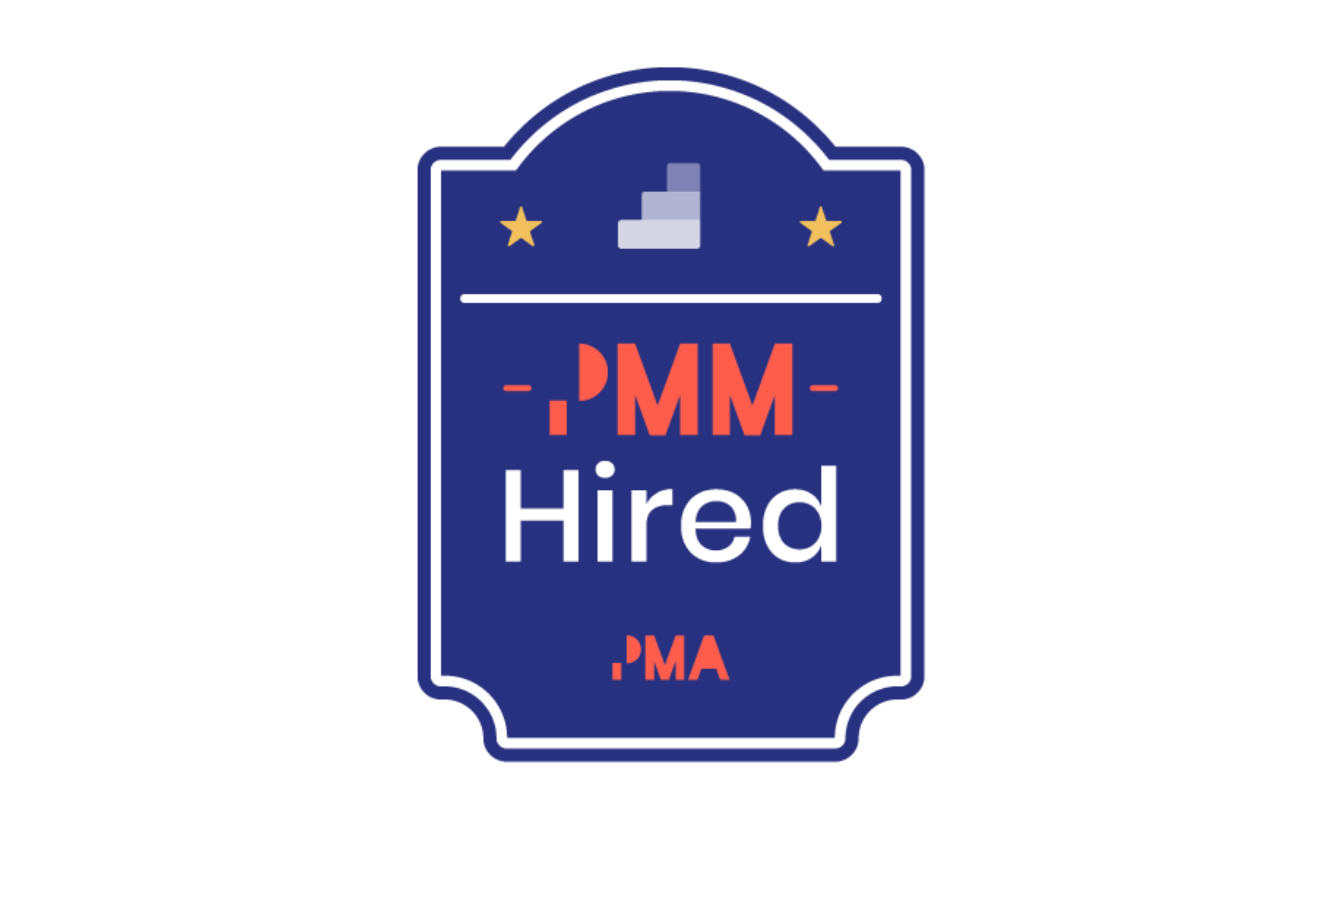 PMM Hired badge